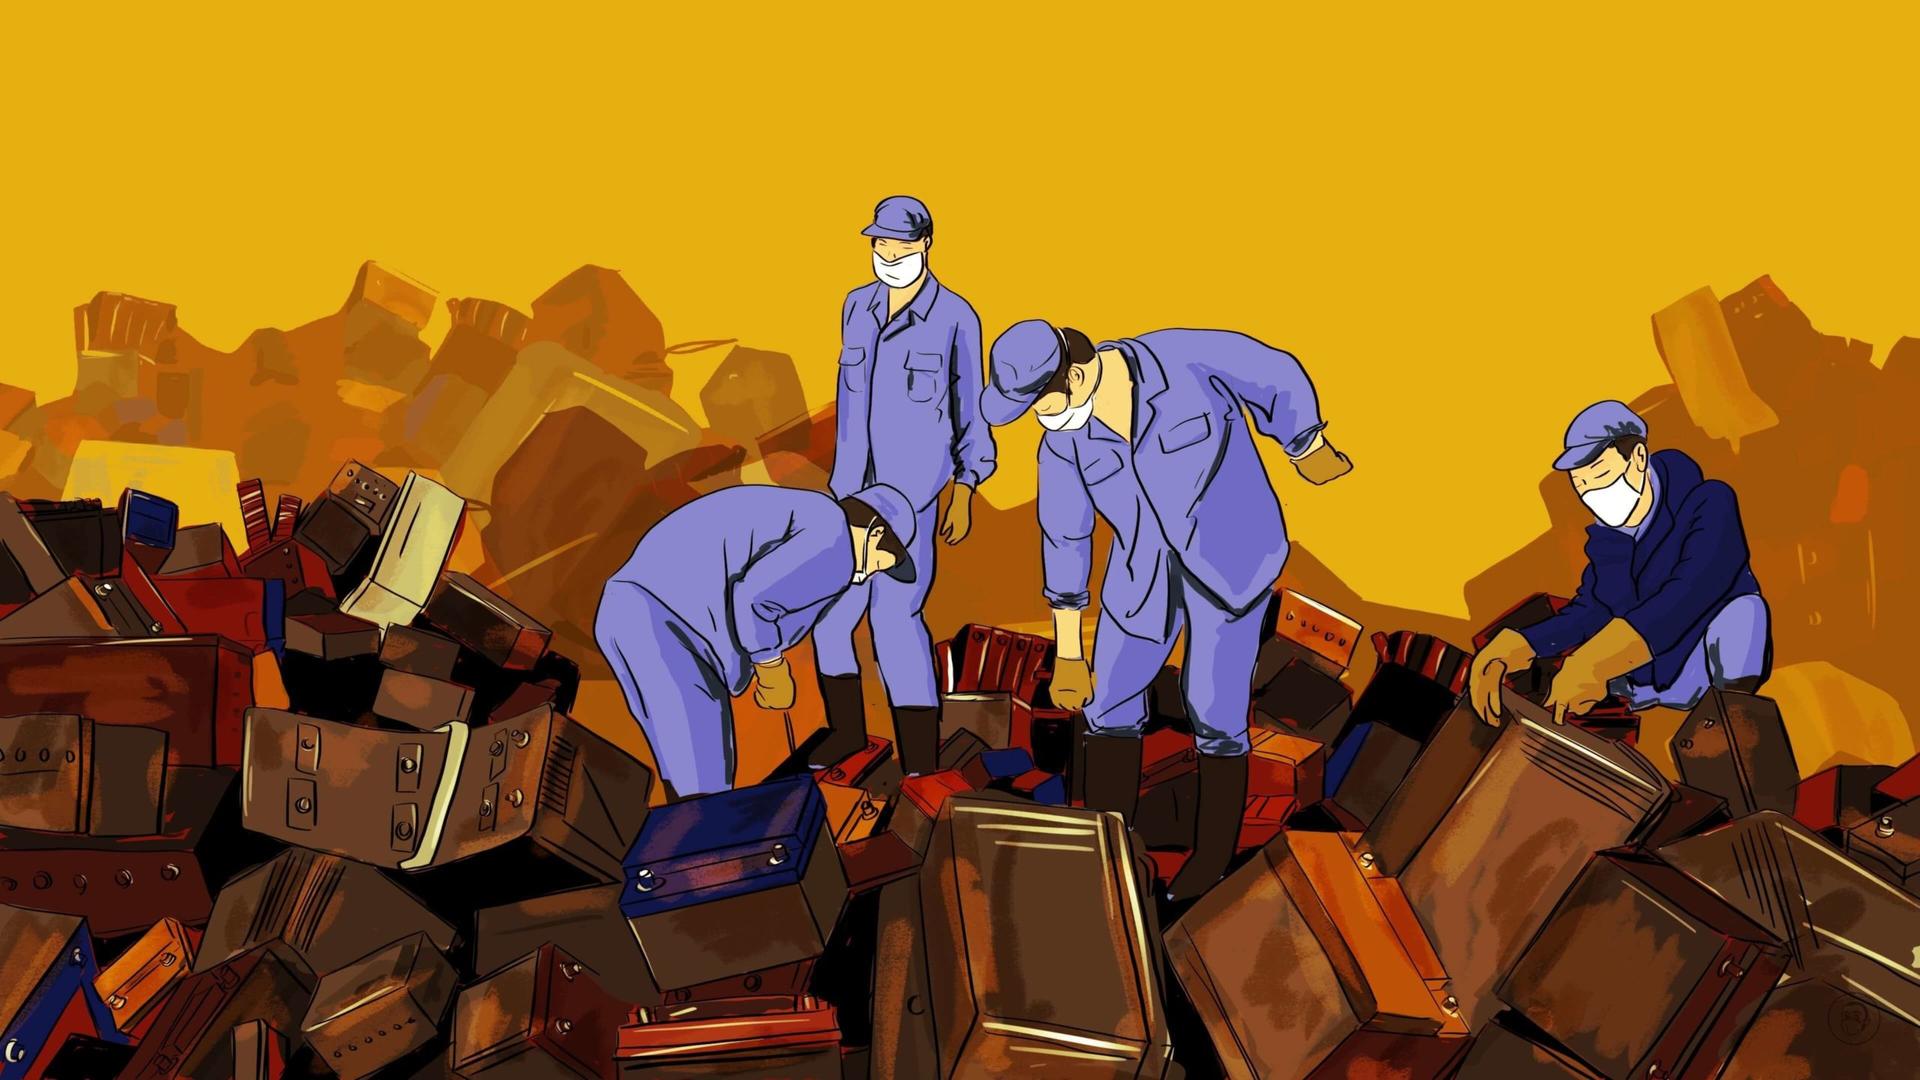 An illustration by Alex Santafe depicting workers on a battery recycling plant in China